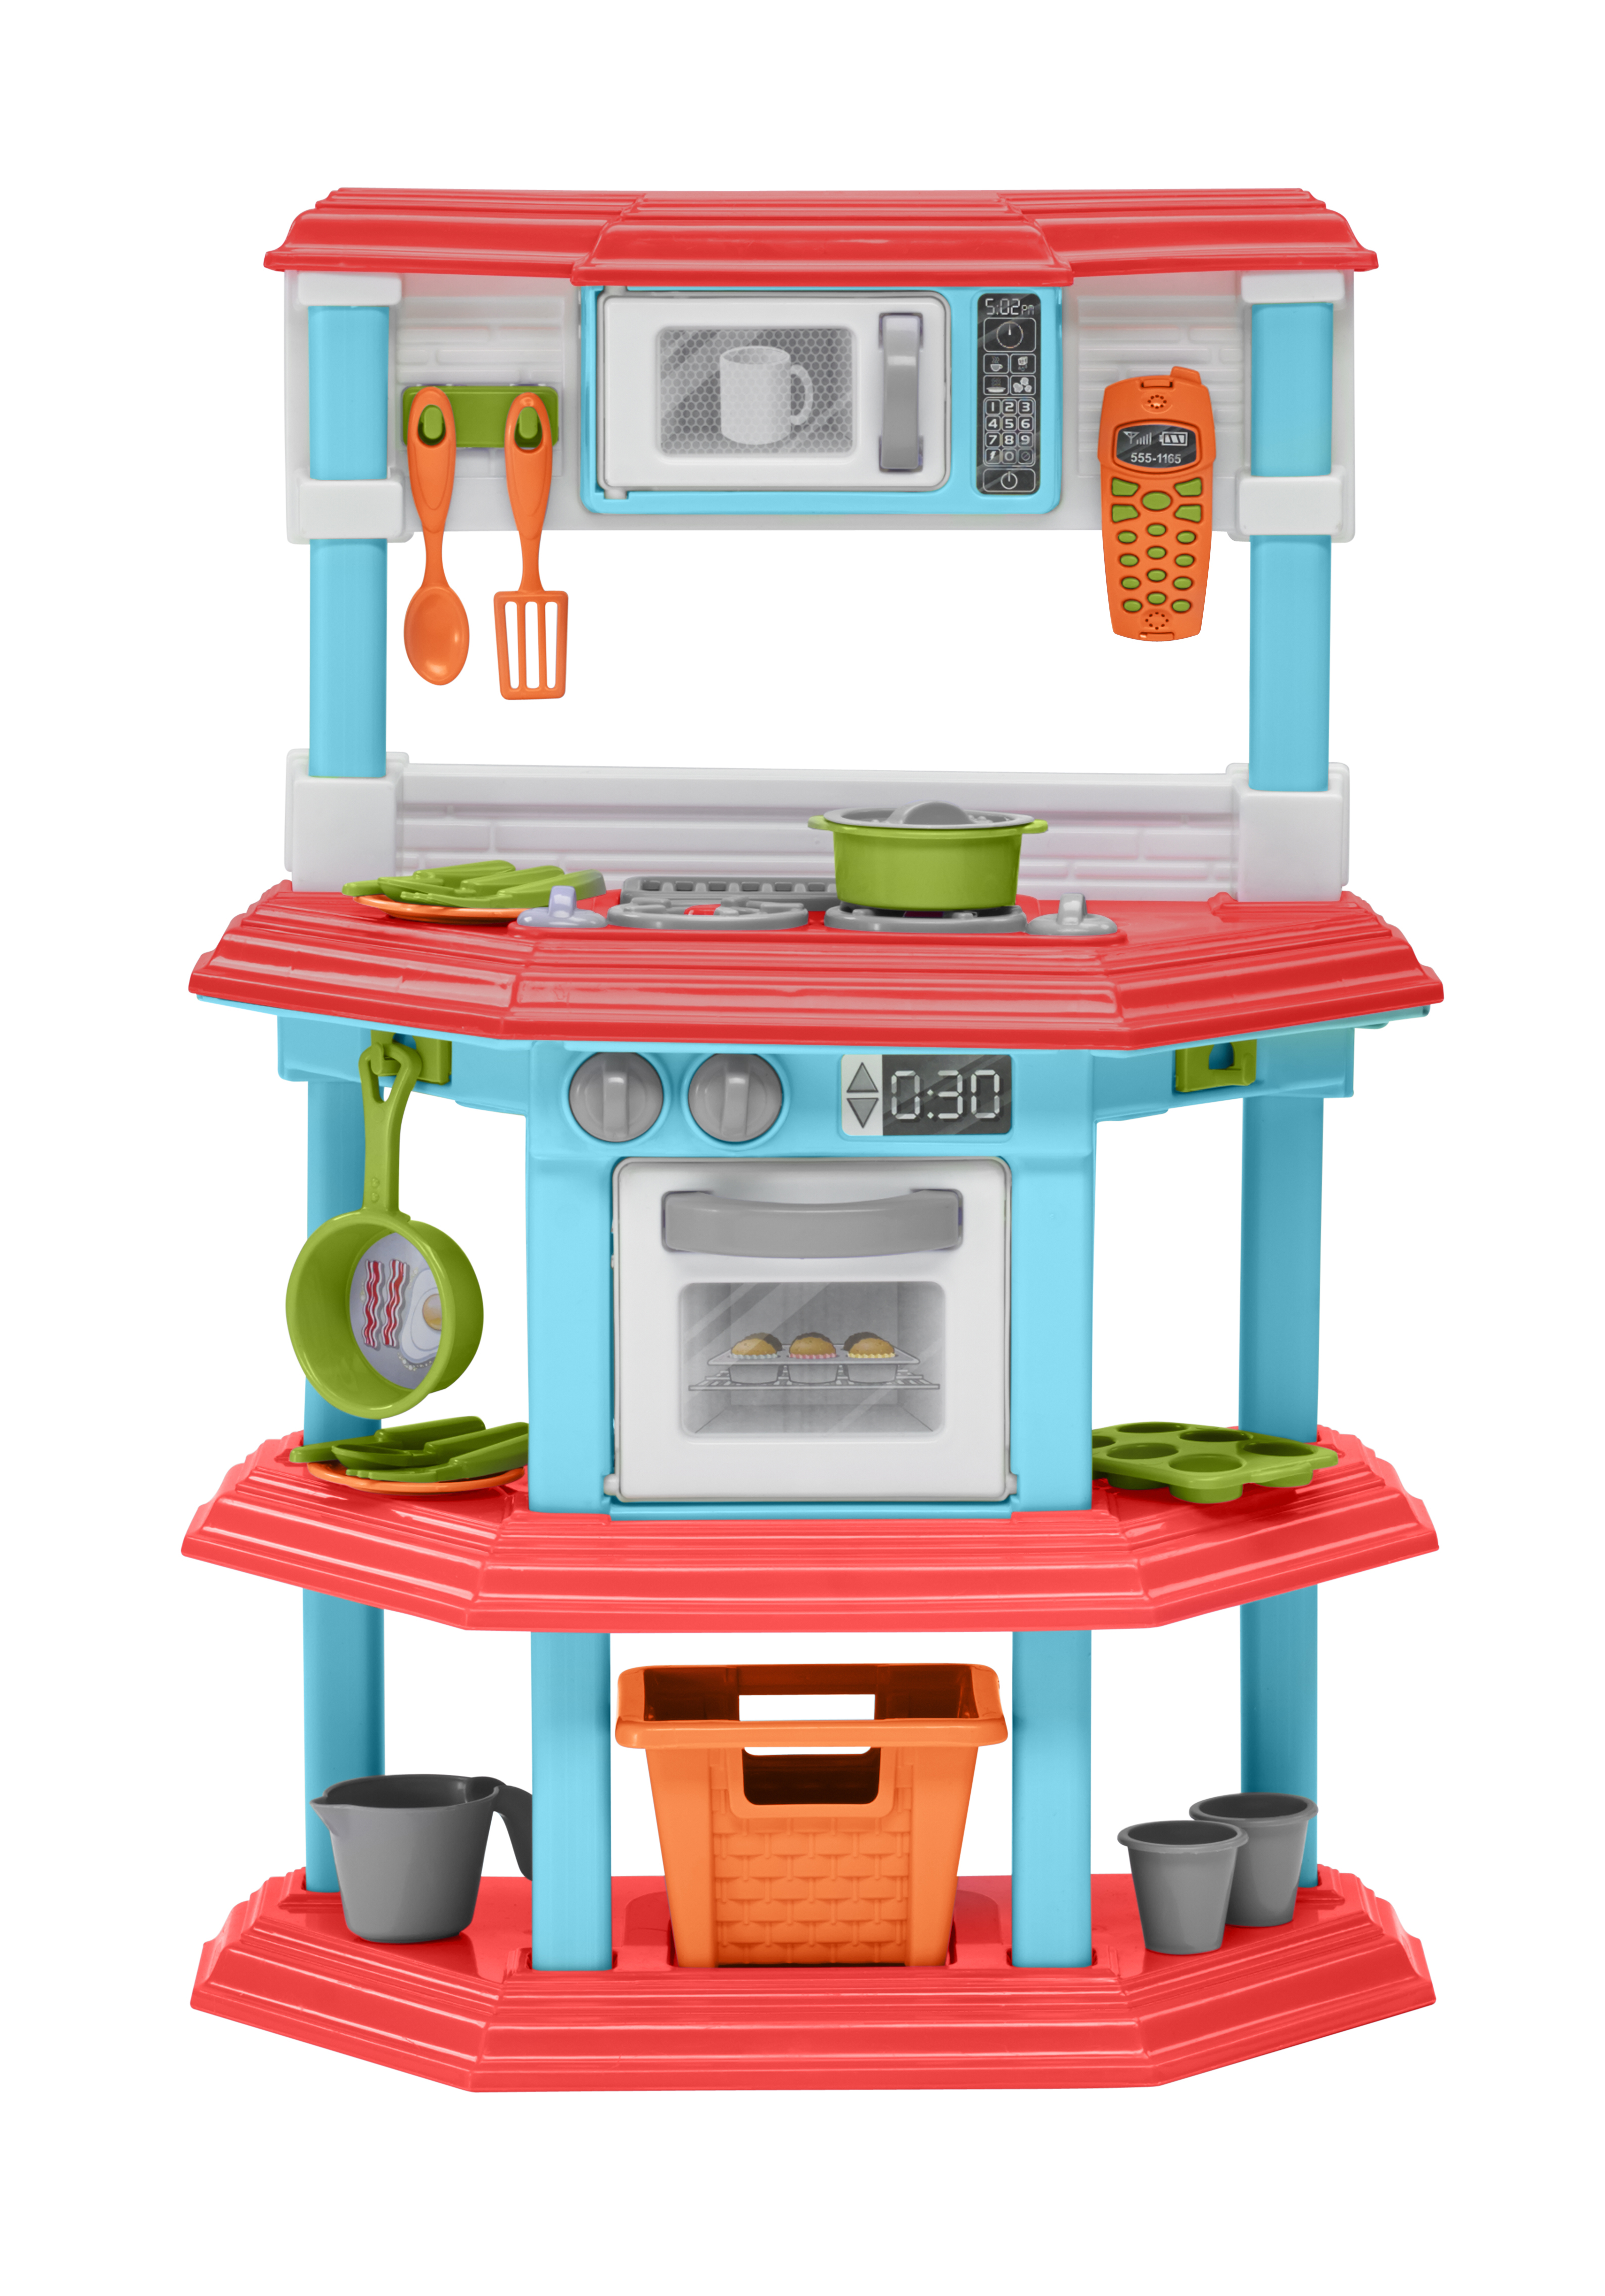 American Plastic Toys My Very Own Gourmet Kitchen - image 1 of 3